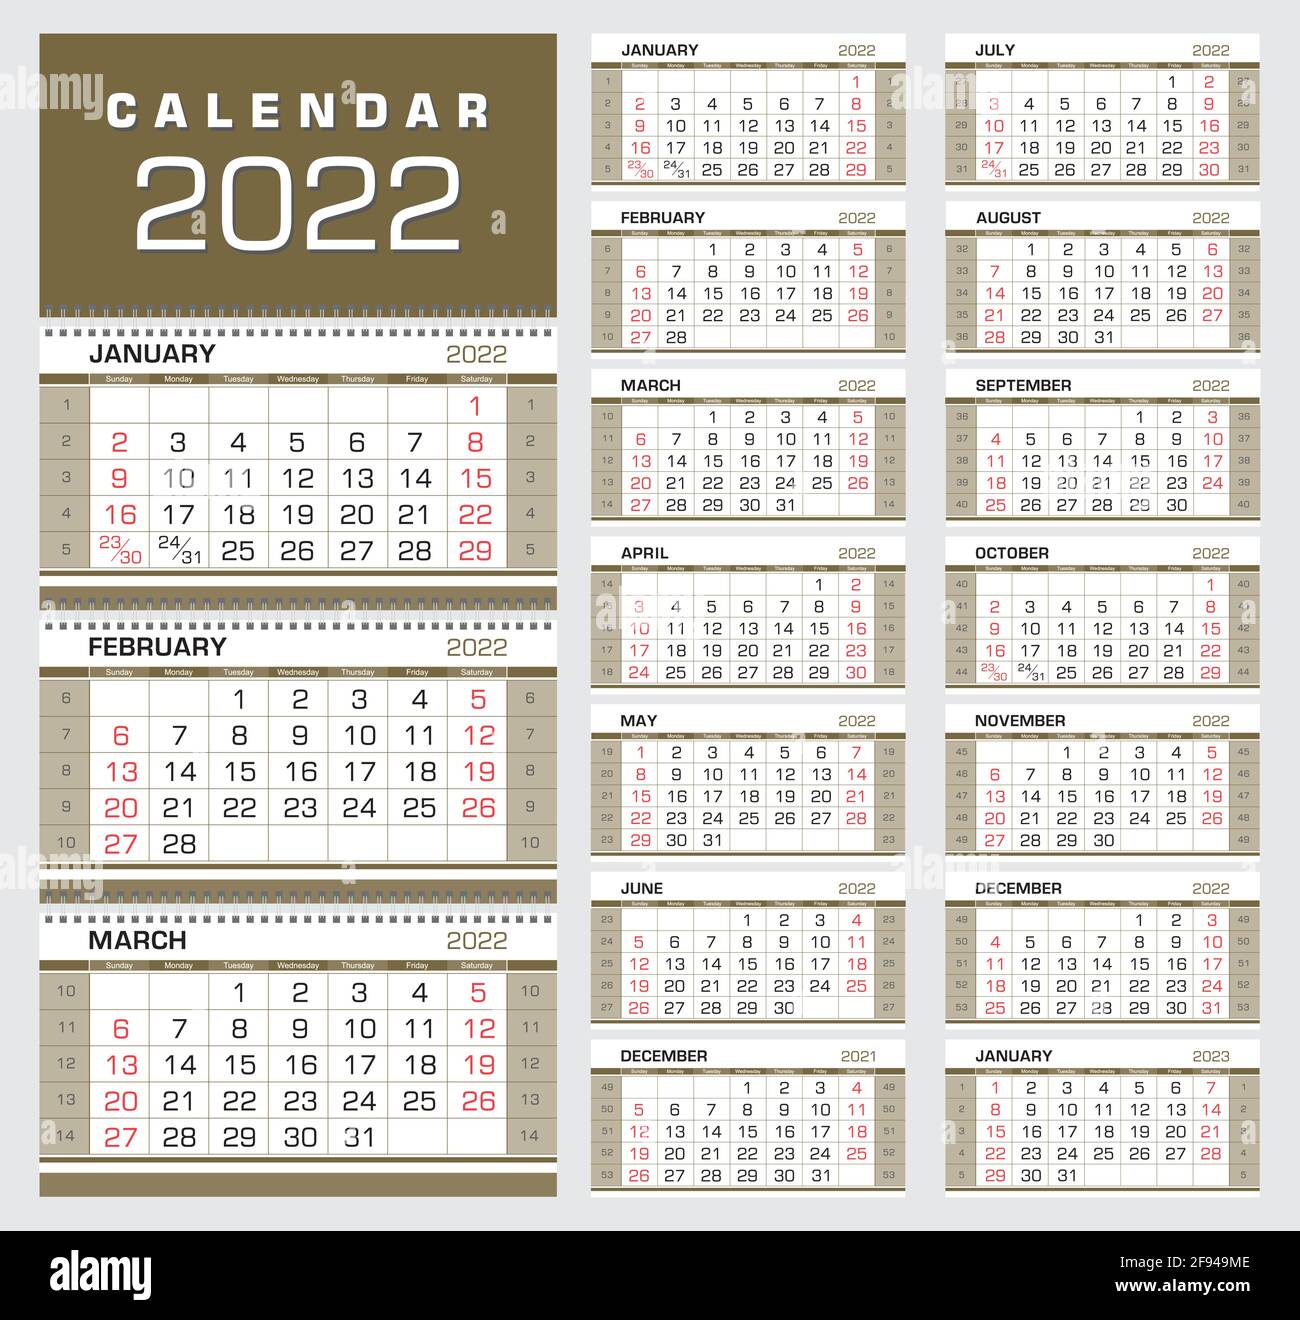 Calendar 2022 Wall Quarterly Calendar With Week Numbers Week Start From Sunday Ready For Print Color Black Red Gold Vector Illustration Stock Vector Image Art Alamy